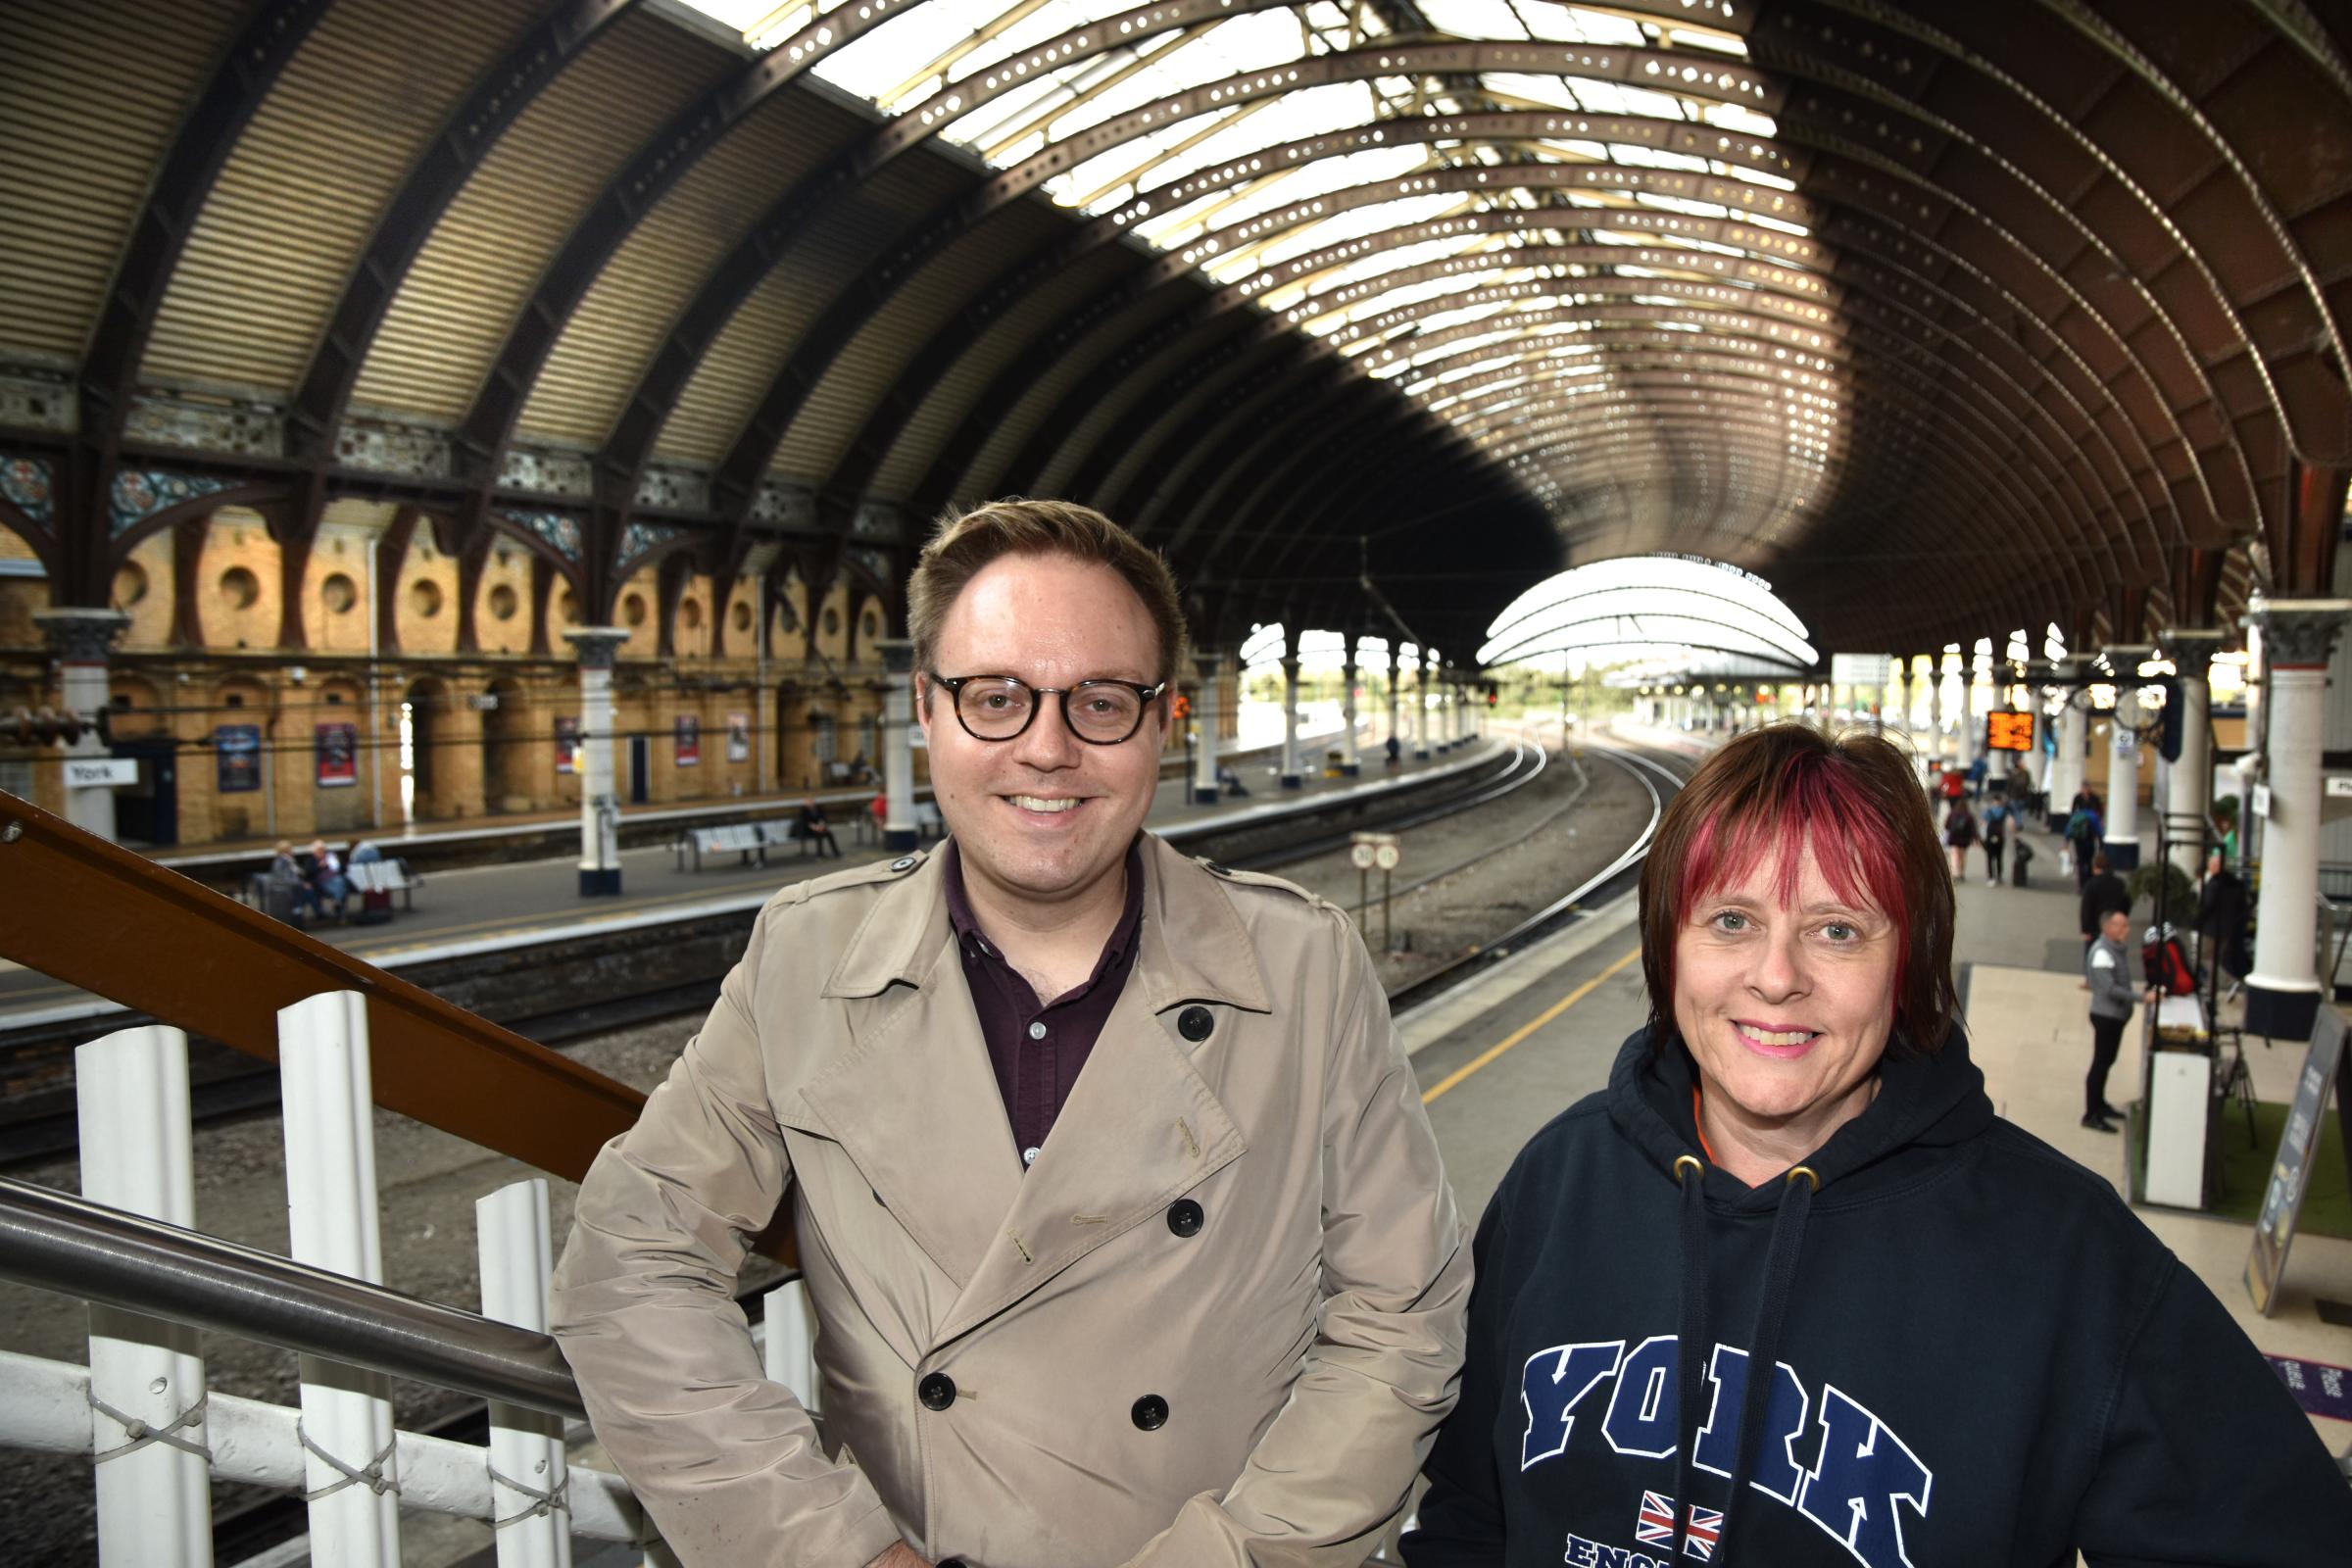 York station in the running for 'world cup' of railway hubs